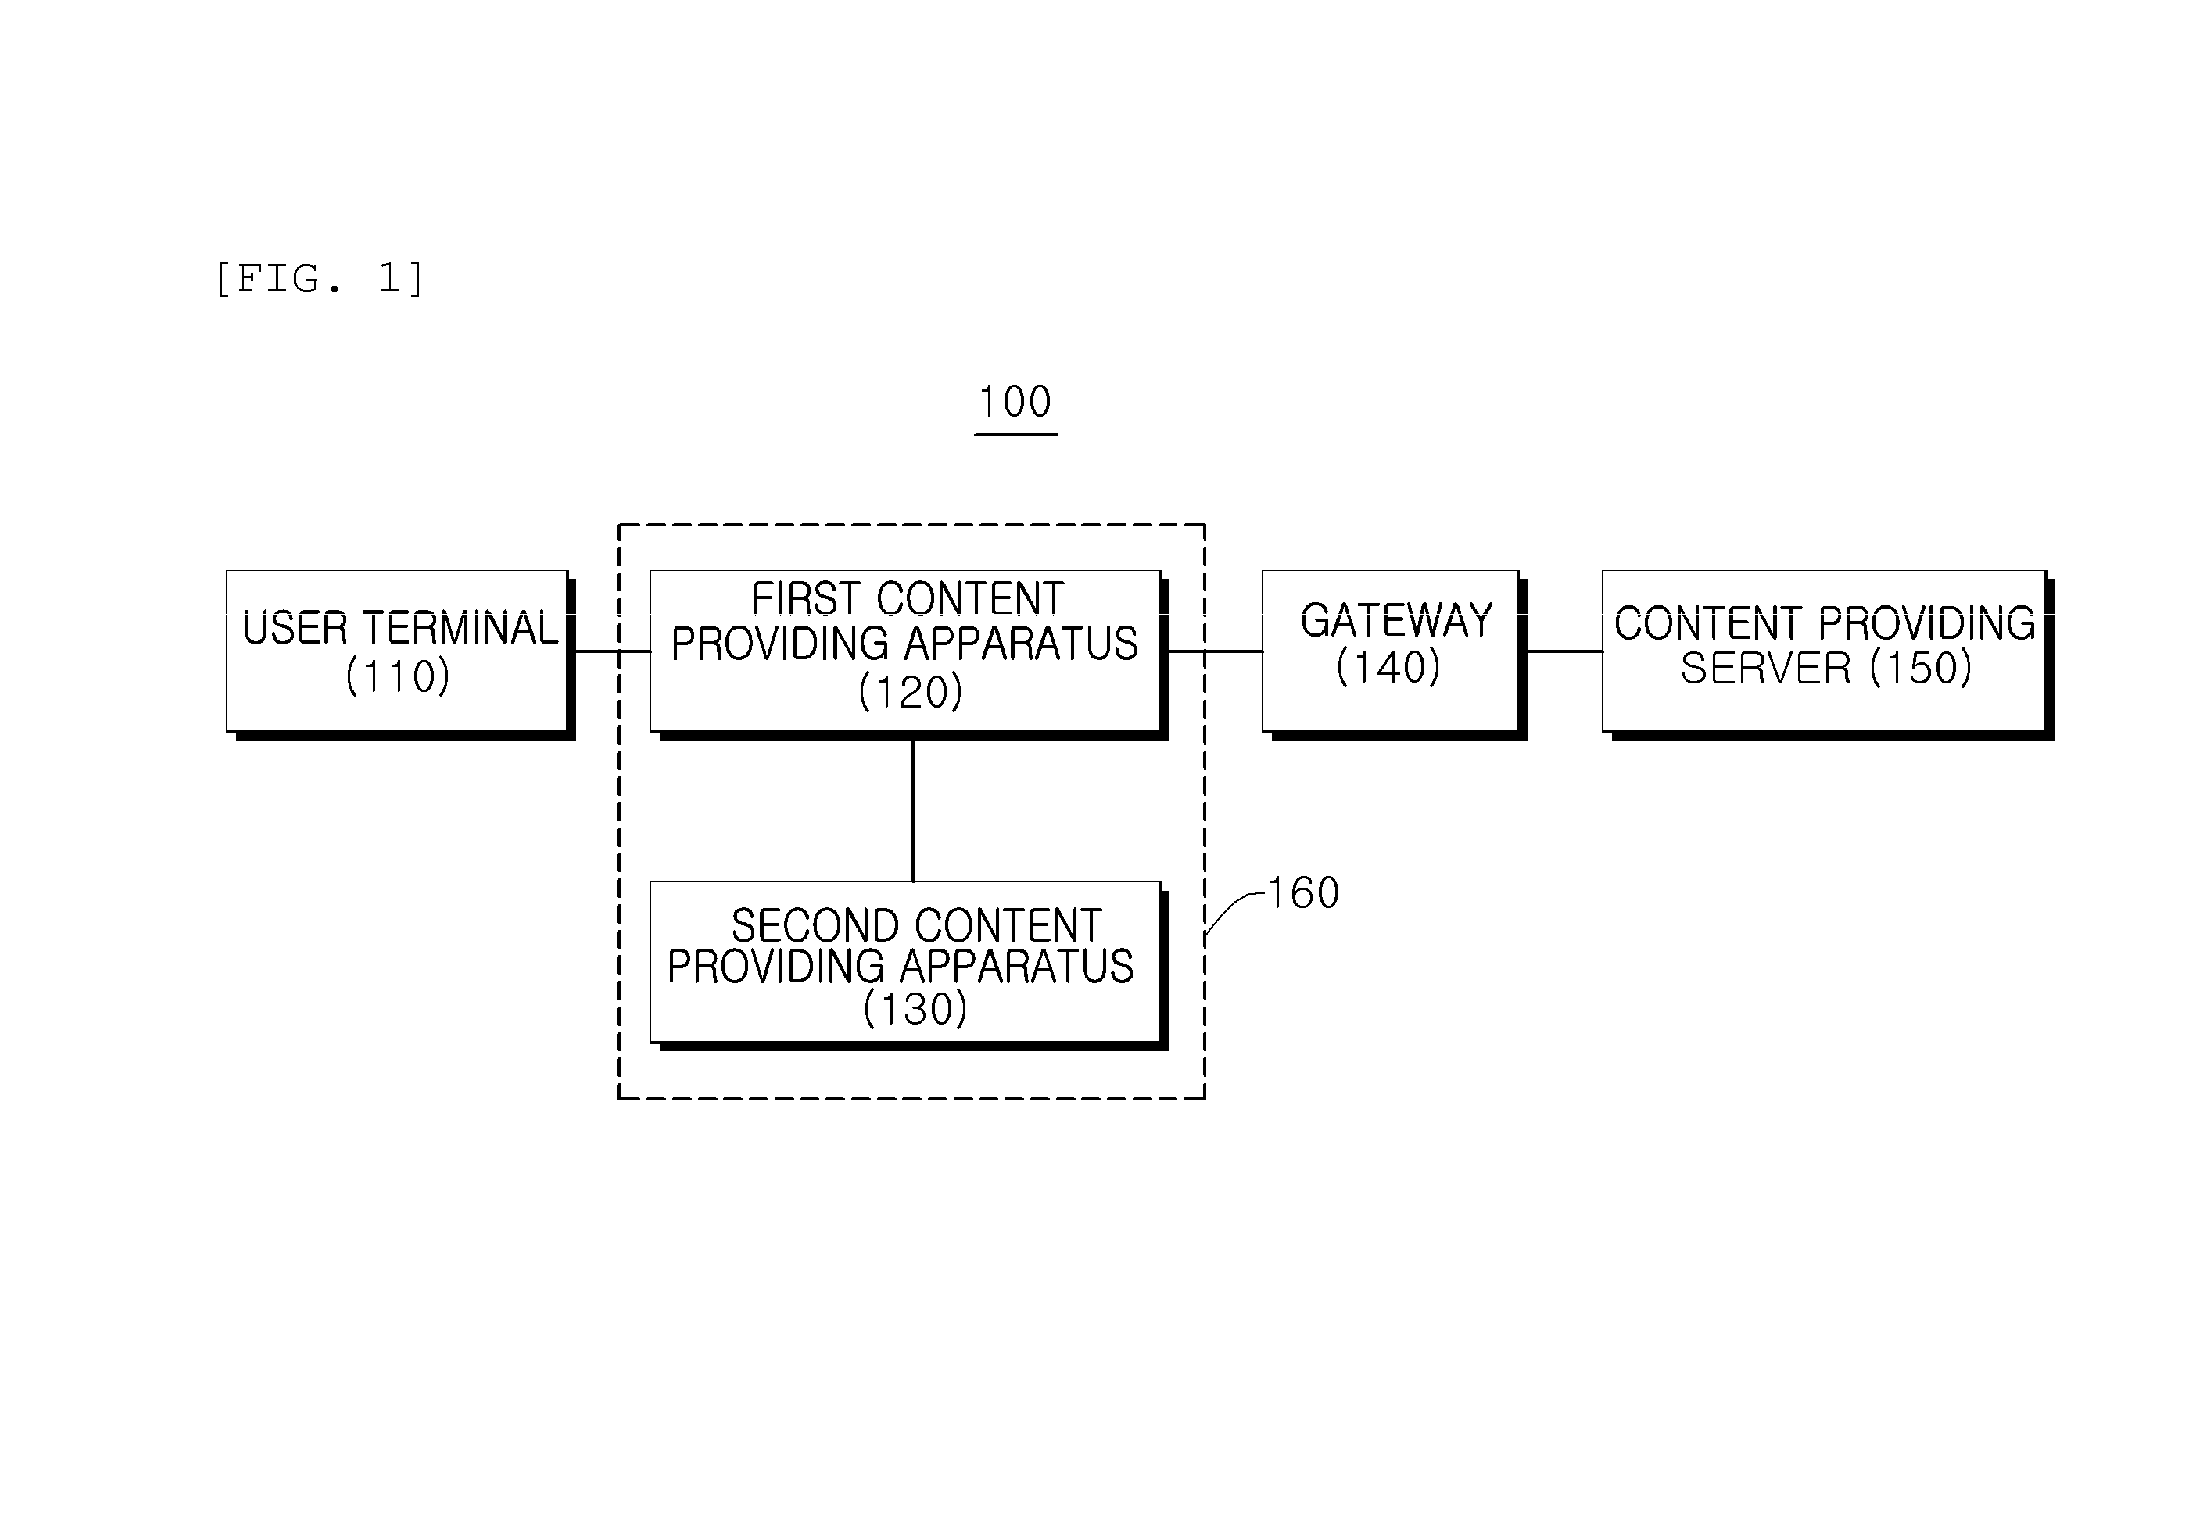 Apparatus and method for providing content, and system for providing content with the said apparatus